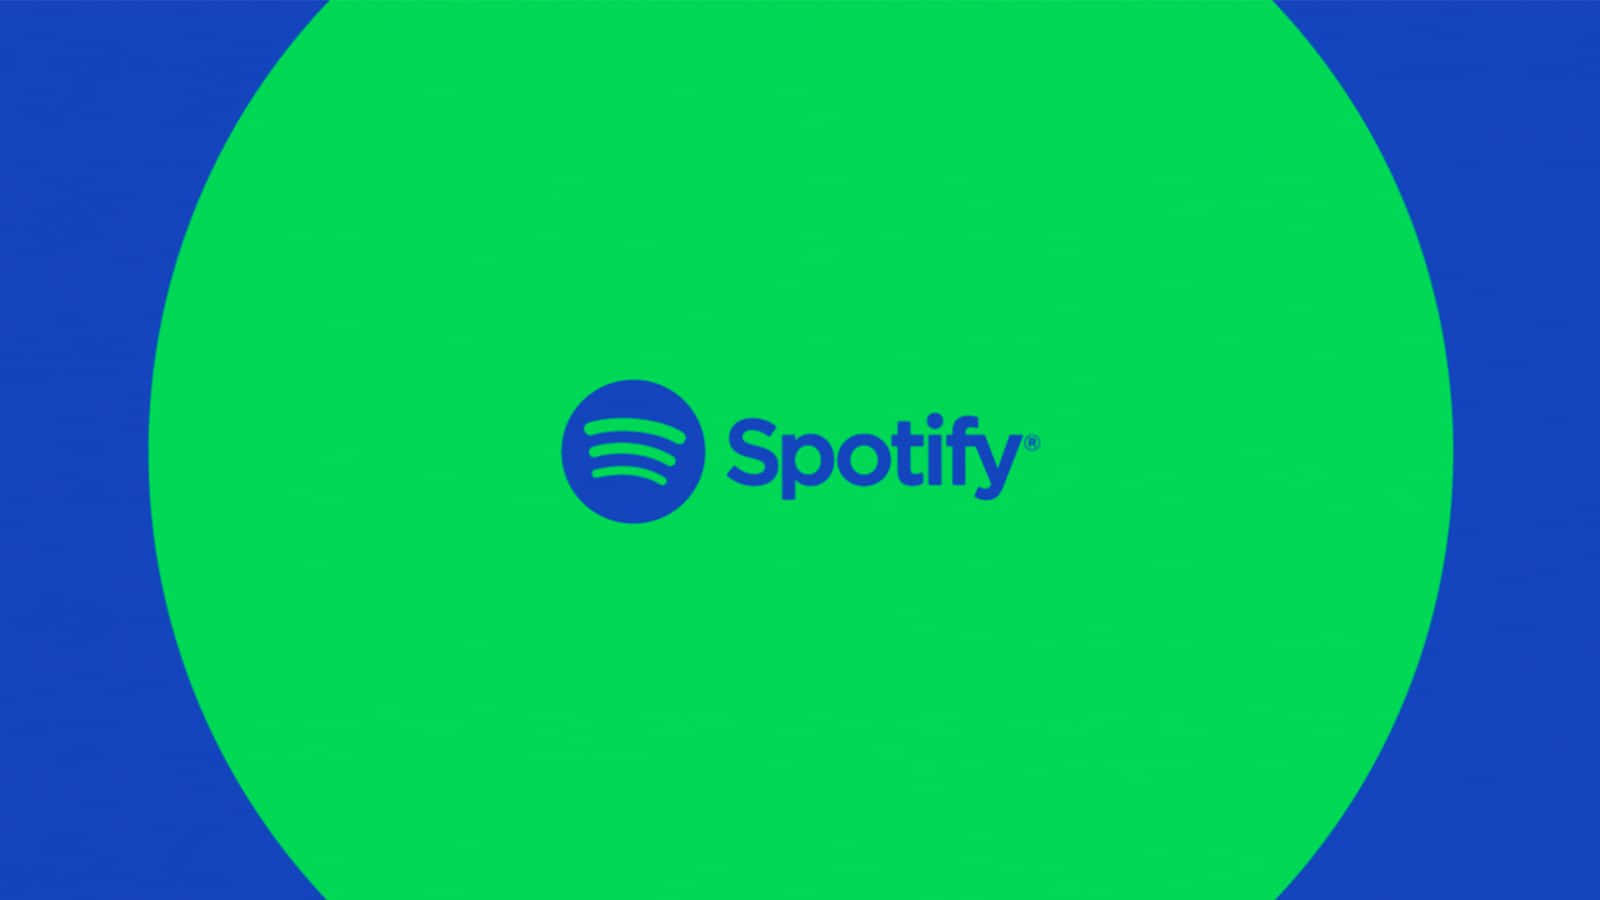 Listen to Music Anywhere with Spotify